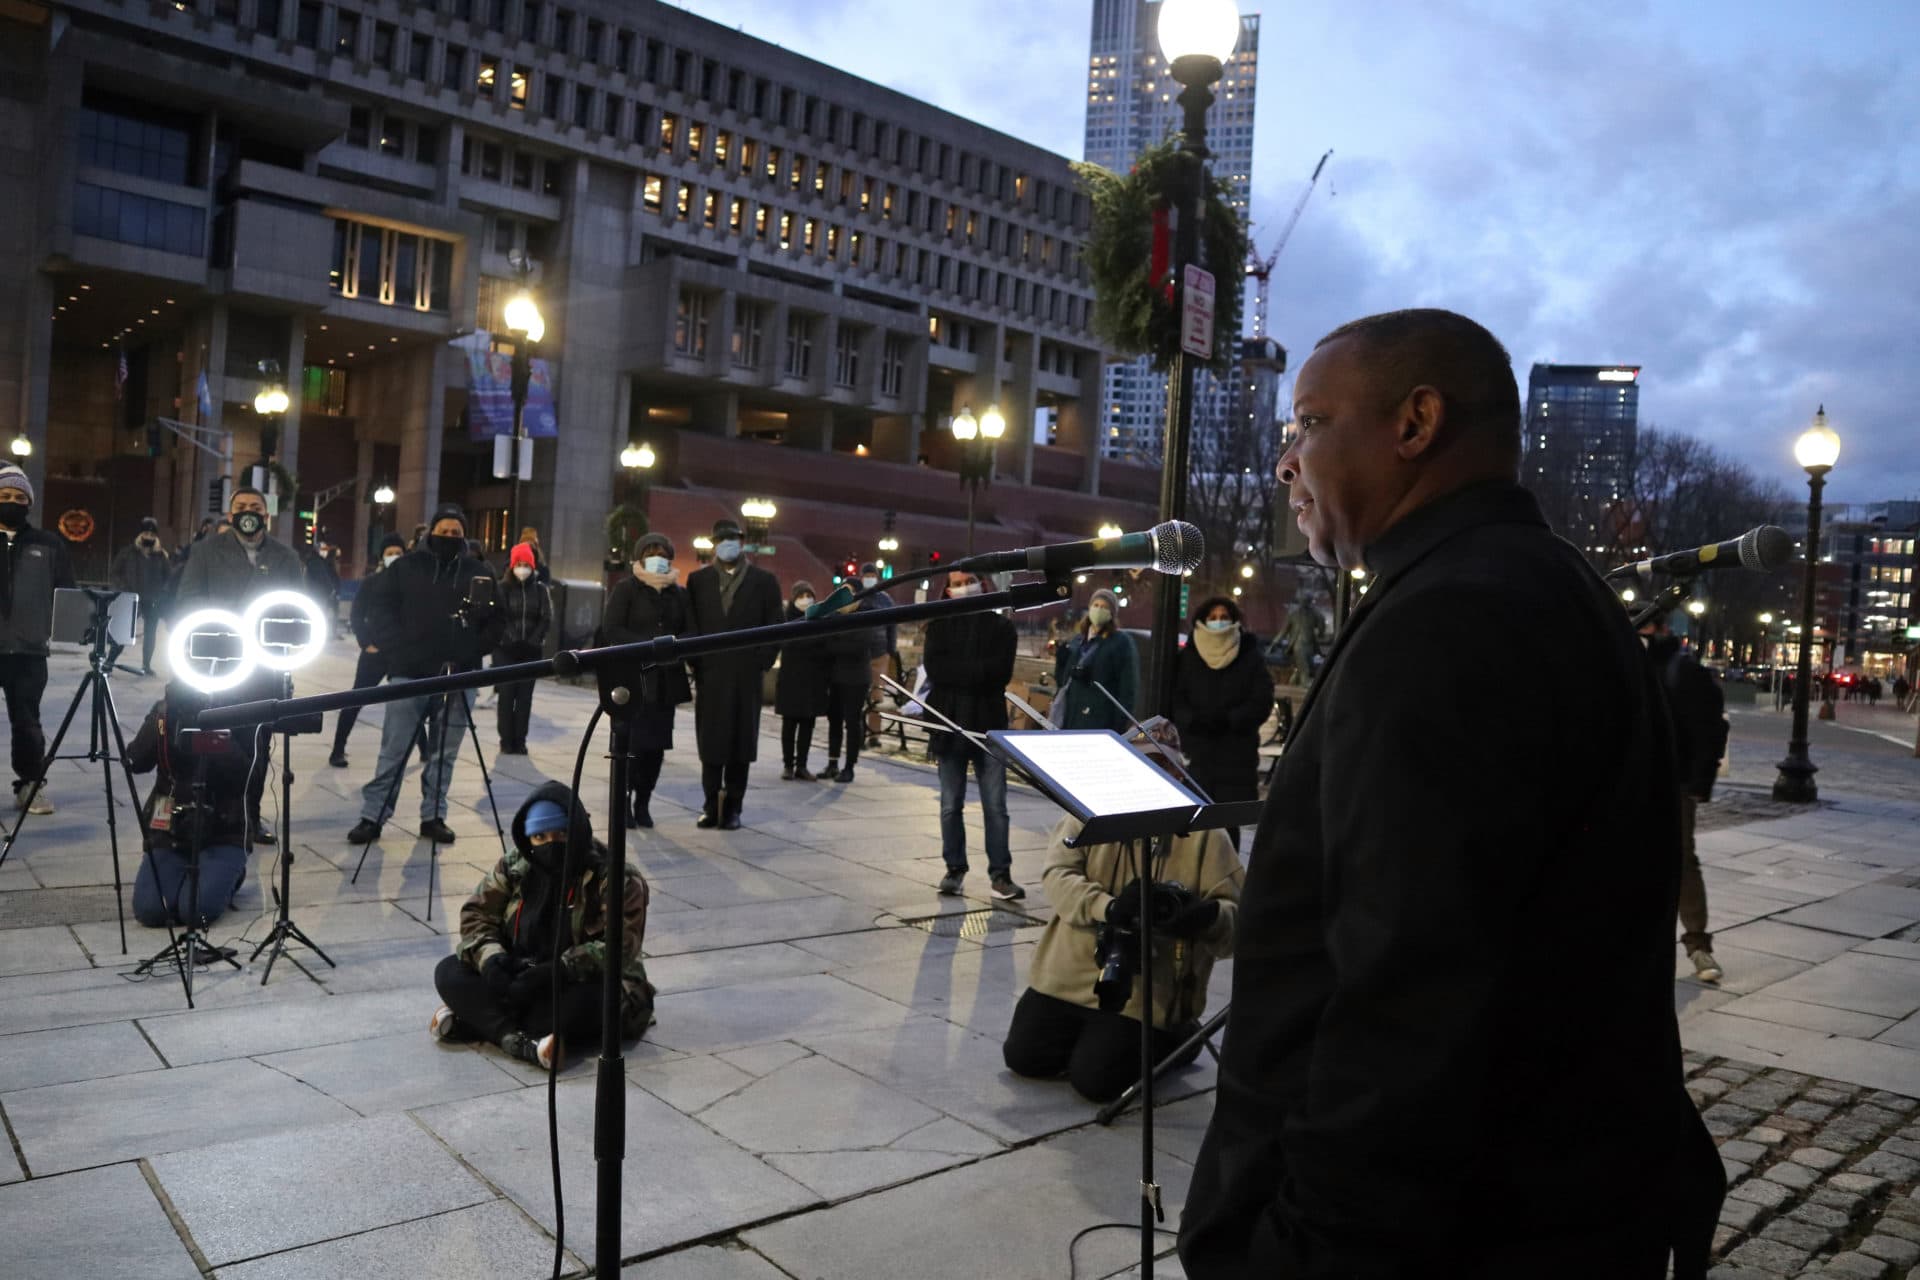 Kevin Peterson, a minister, speaks to a crowd gathered in front of Faneuil Hall in Boston on the eve of Martin Luther King Jr. Day in 2021. (Adrian Ma/WBUR)